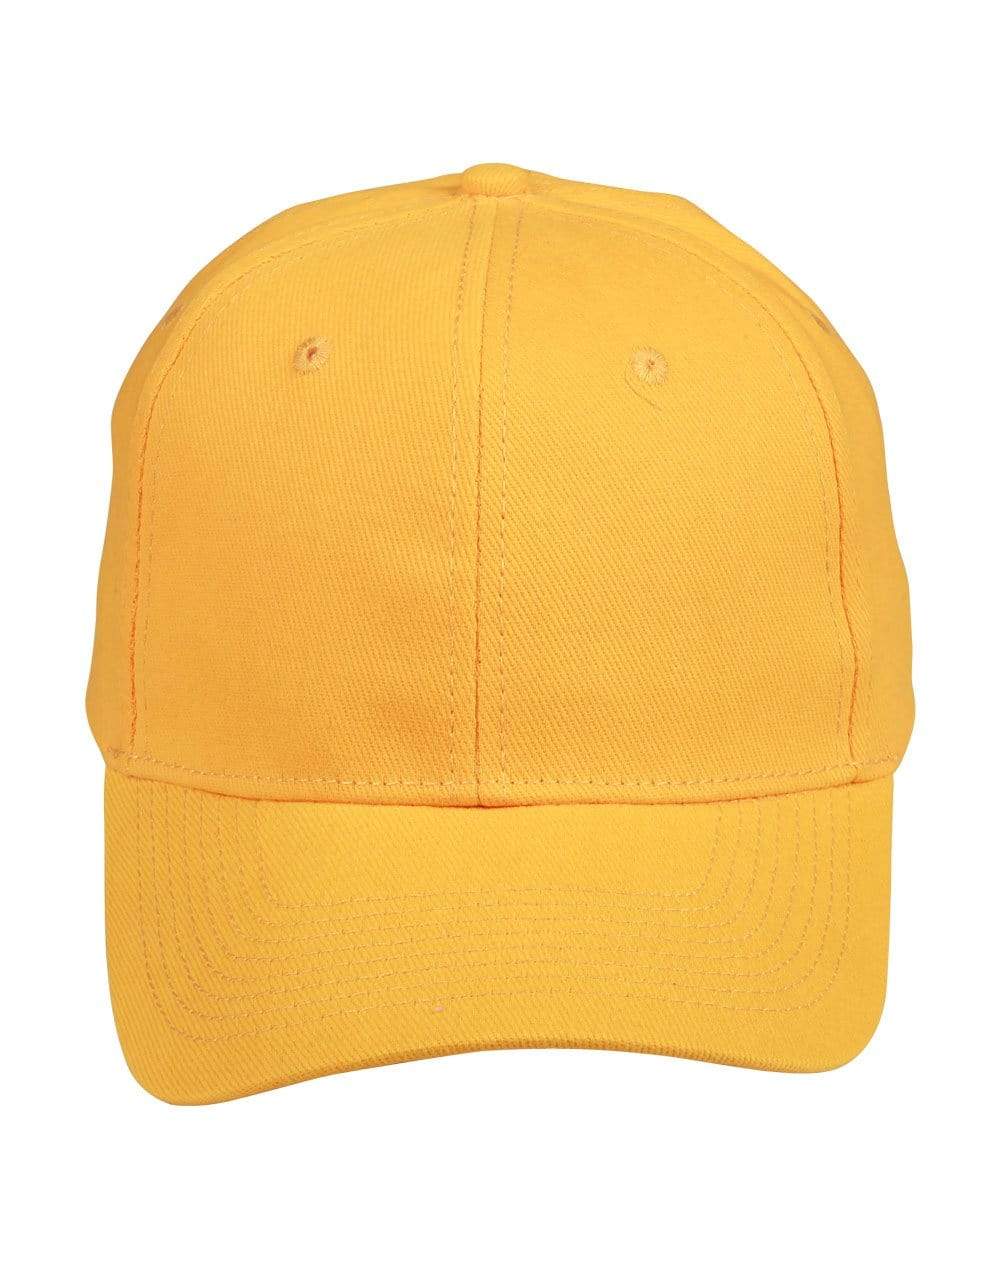 Heavy Brushed Cotton Cap Ch01 Active Wear Winning Spirit Gold One size 